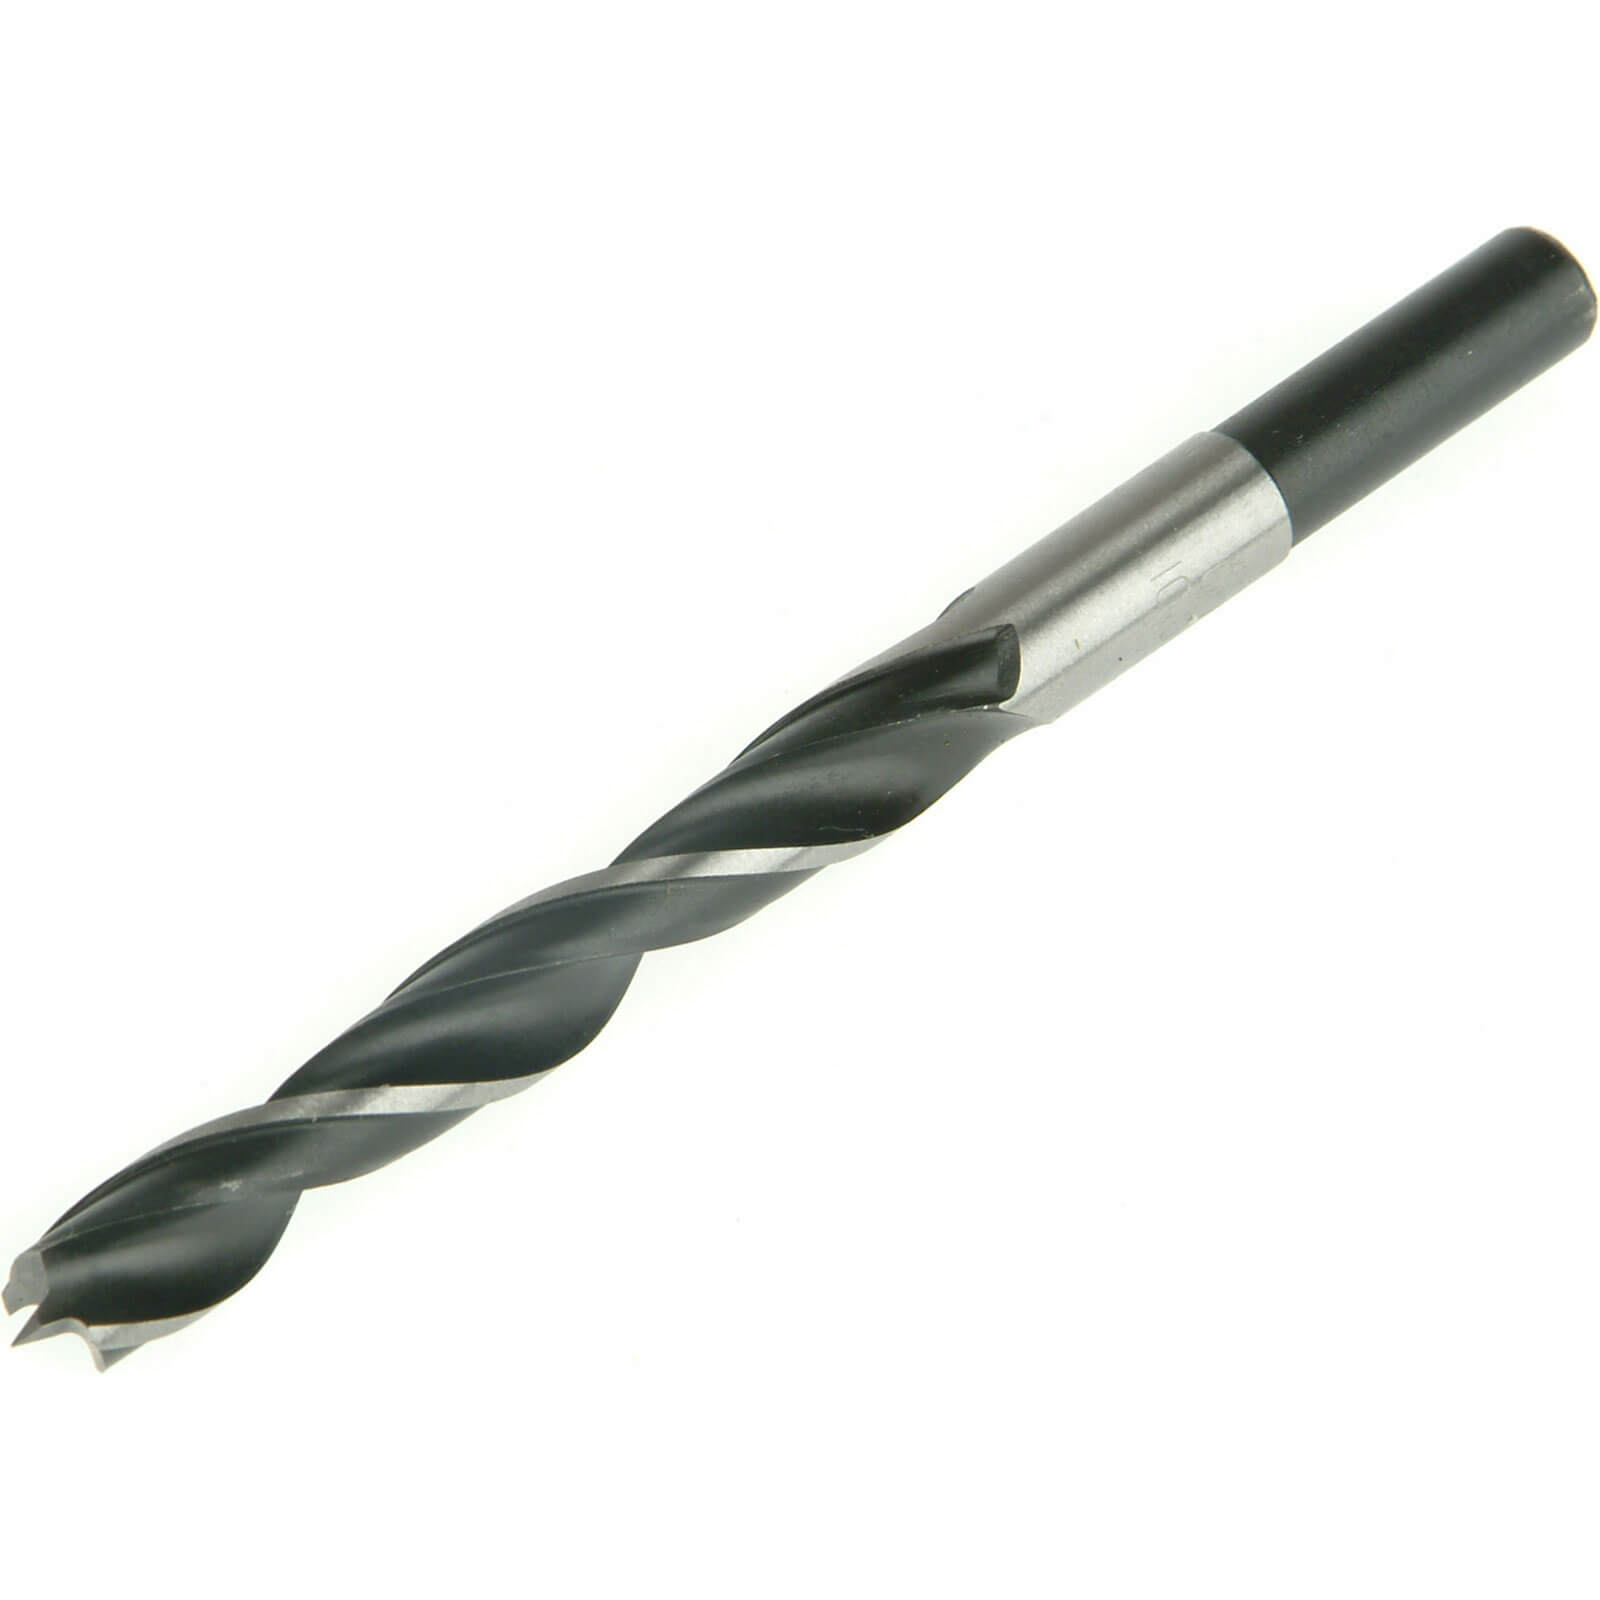 Image of Faithfull Lip and Spur Wood Drill Bit 4mm